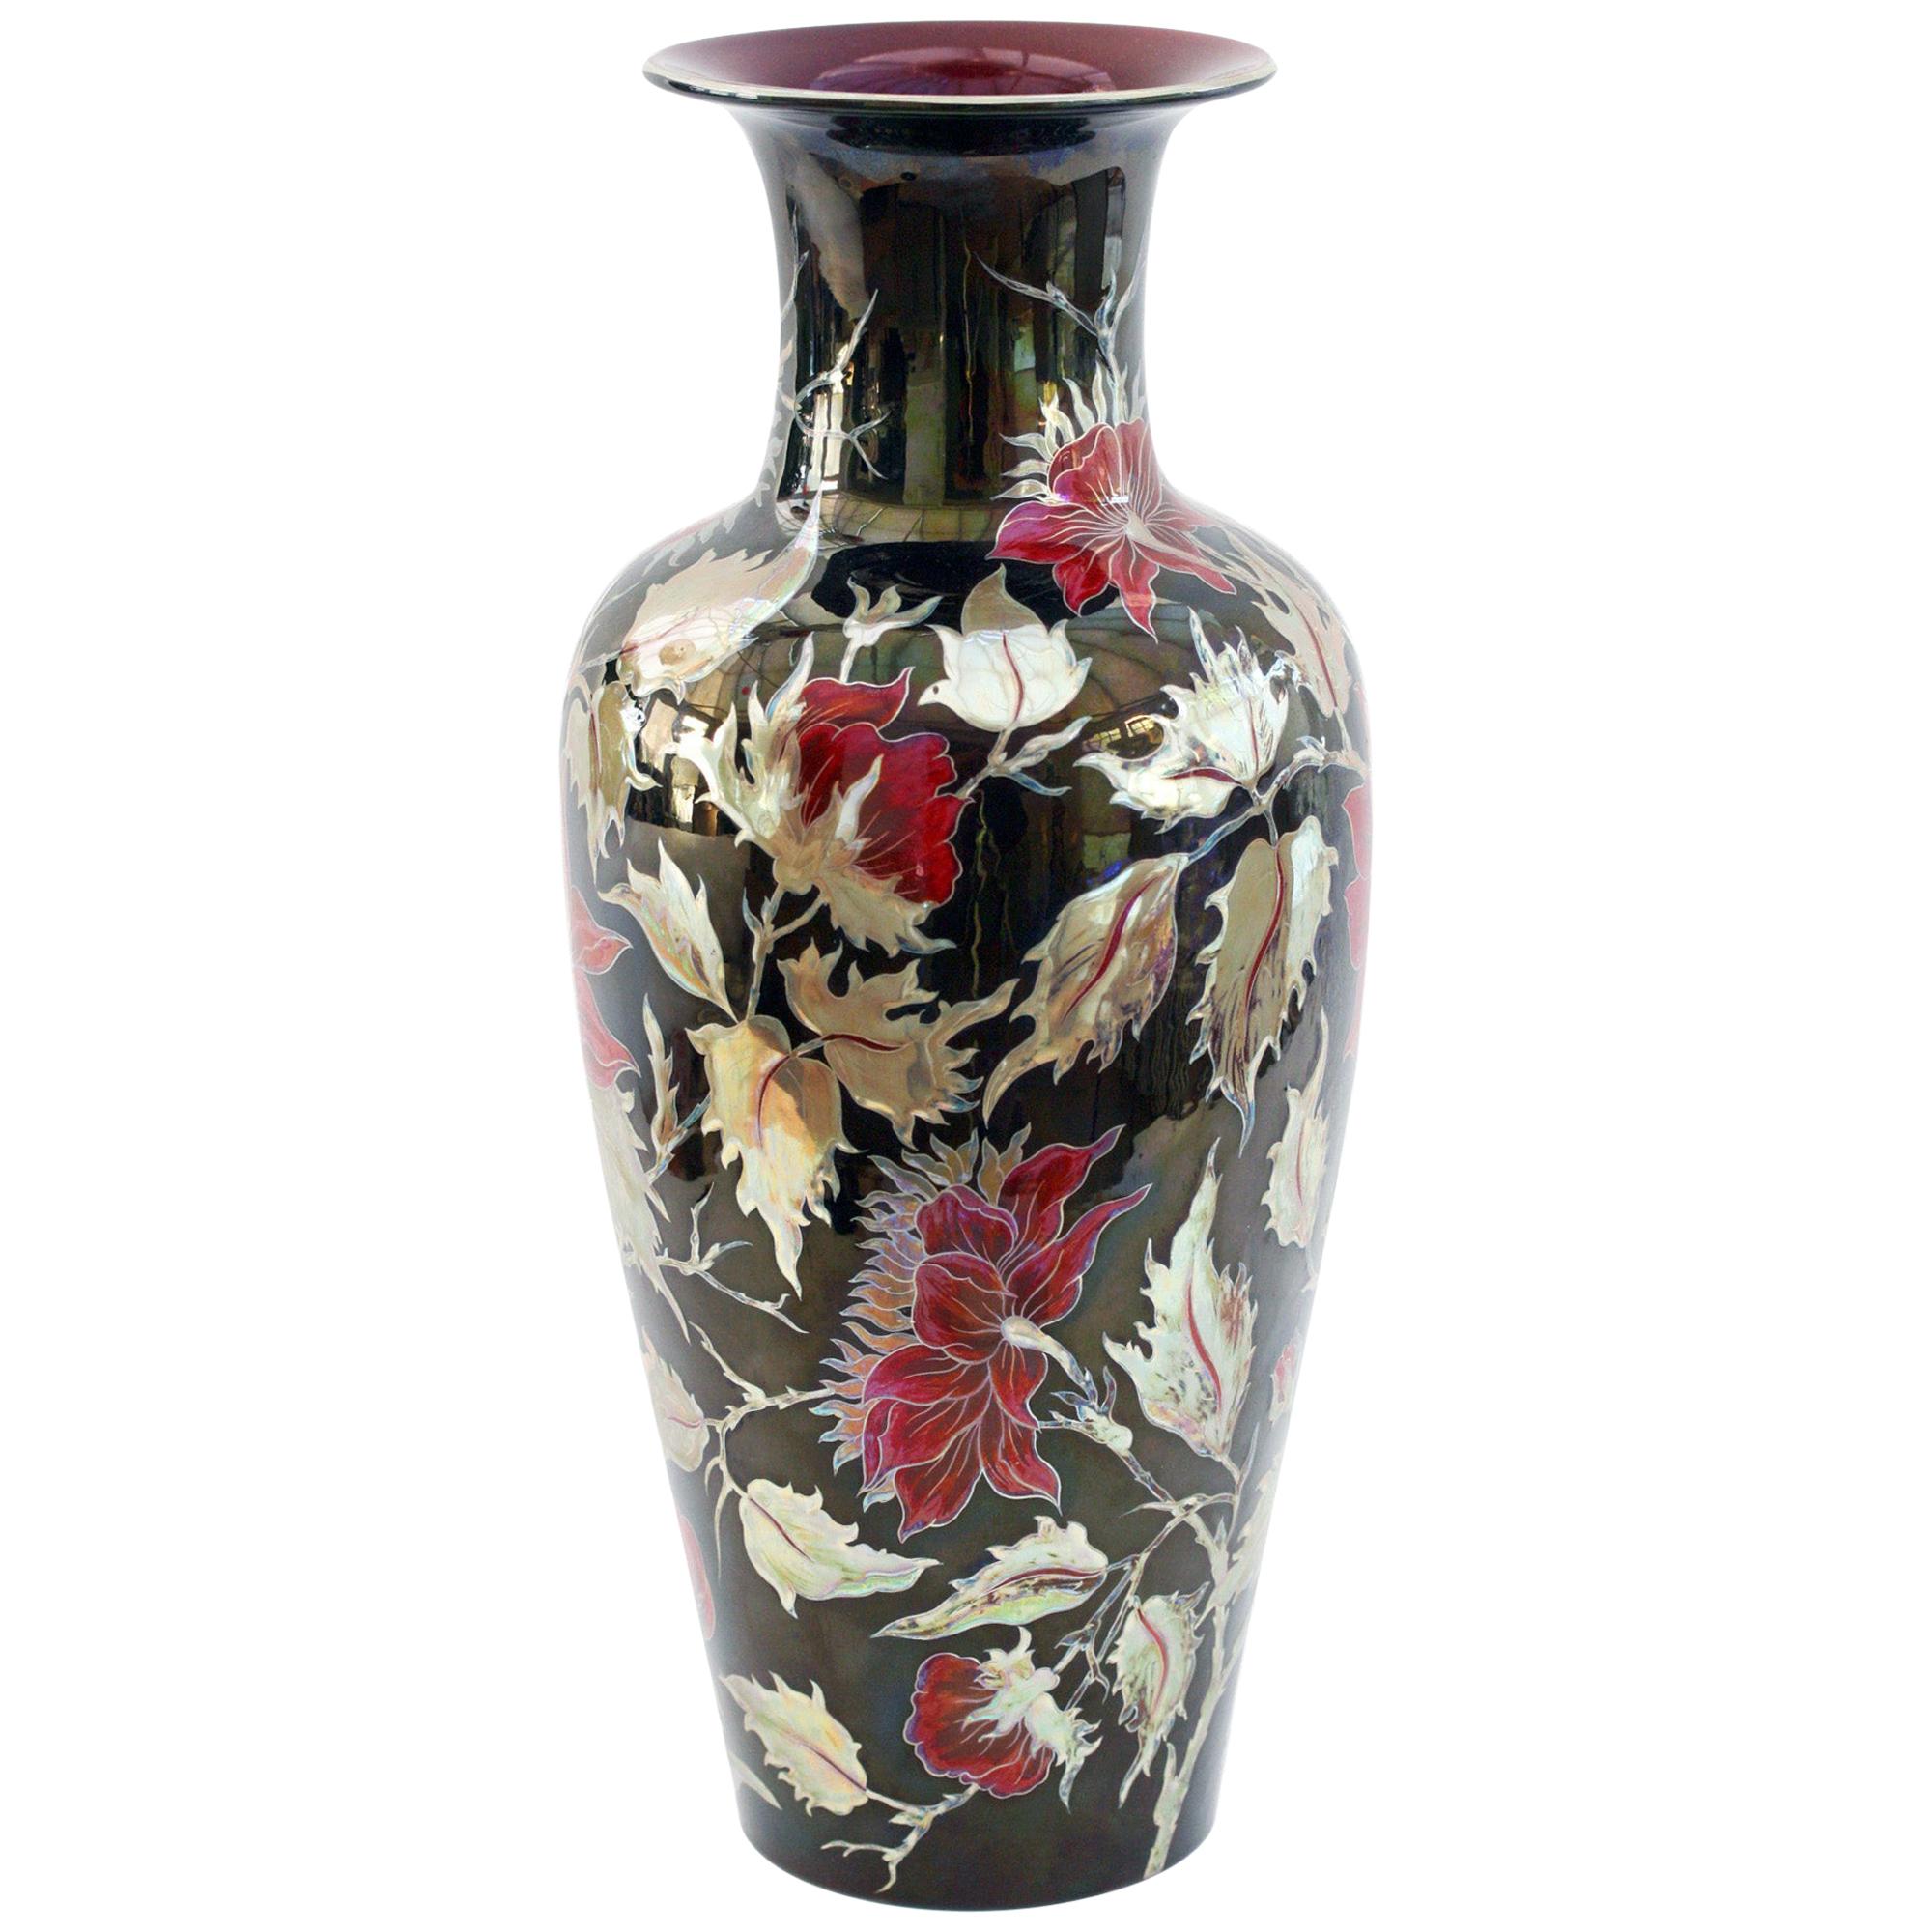 Zsolnay Pecs Exceptional Eosin Glazed Floral Painted Vase by M Sperczel